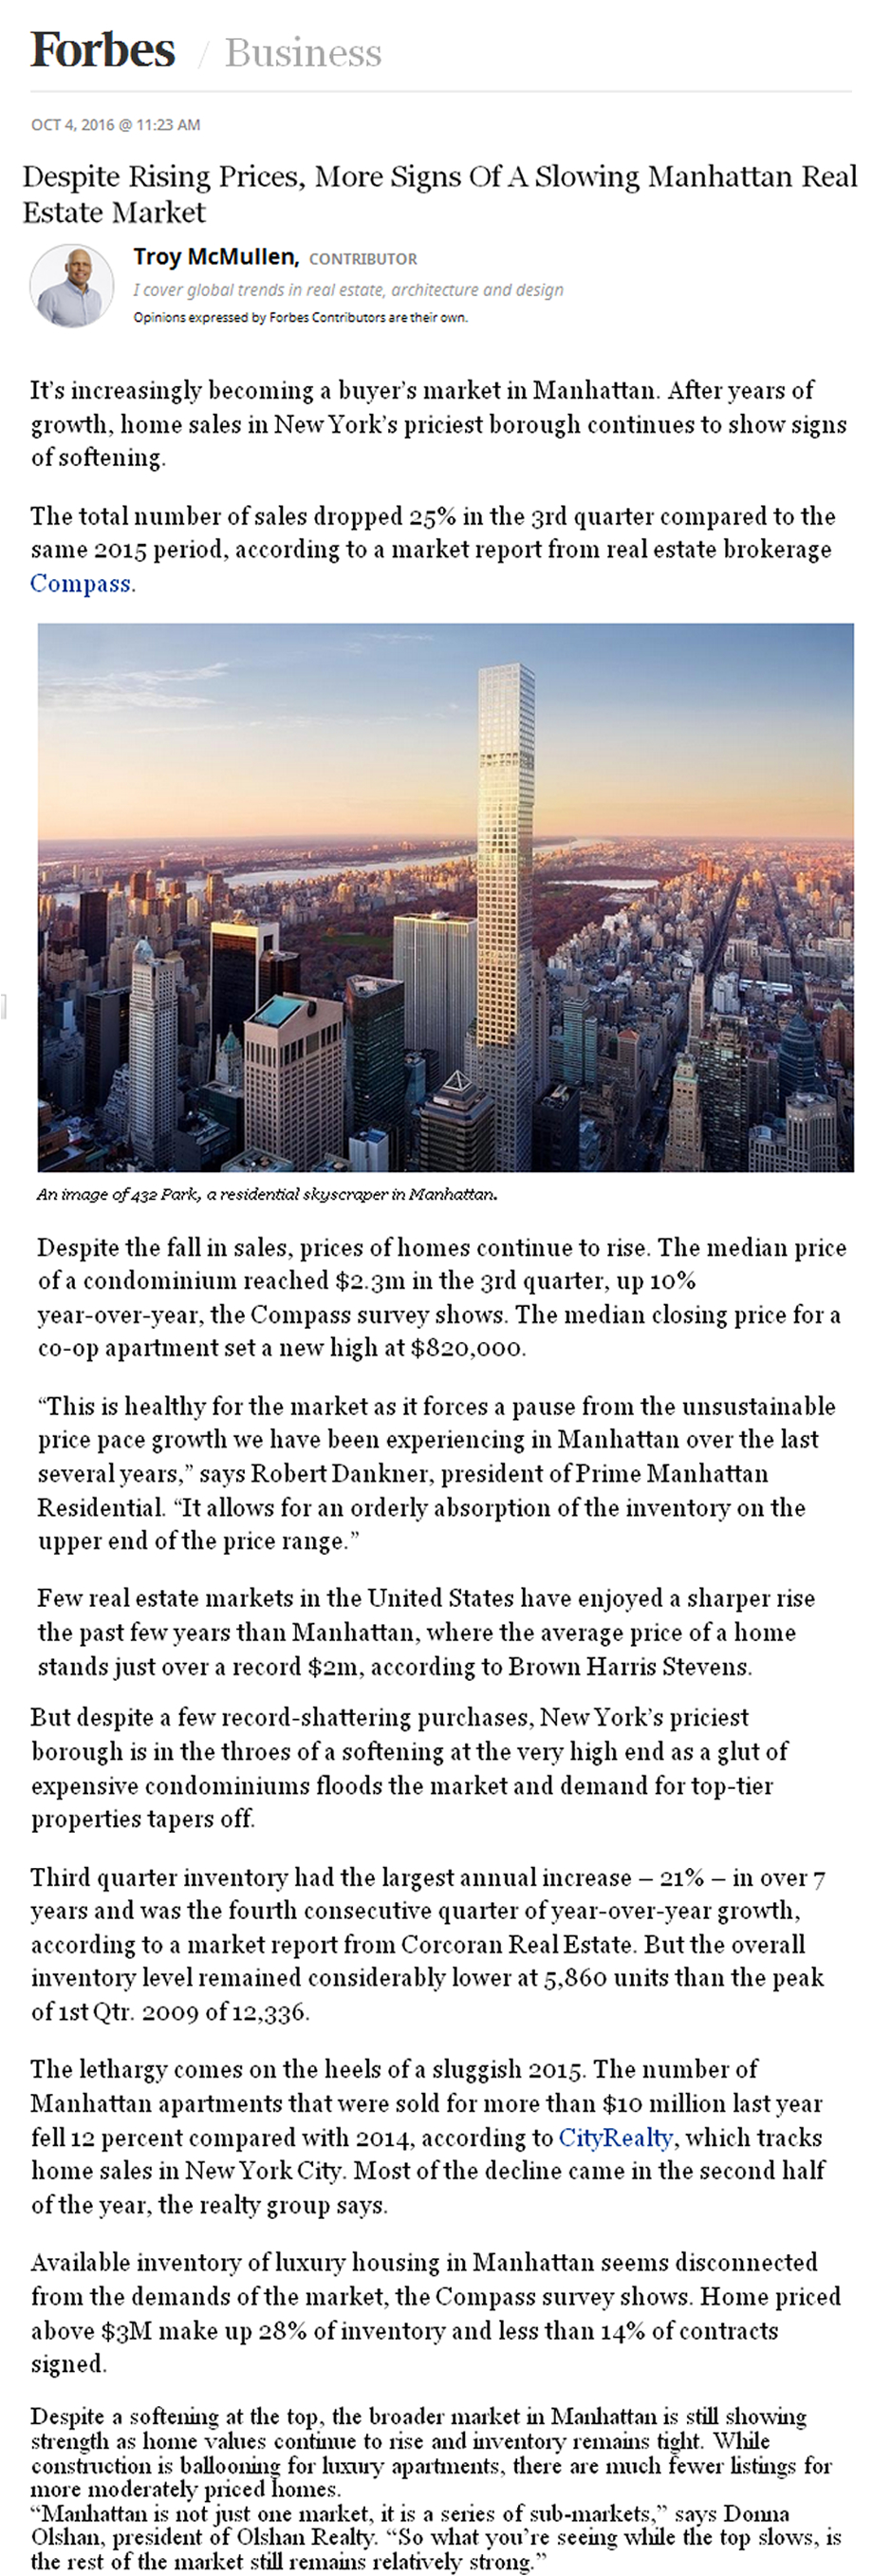 Despite Rising Prices, More Signs Of A Slowing Manhattan Real Estate Market part 1